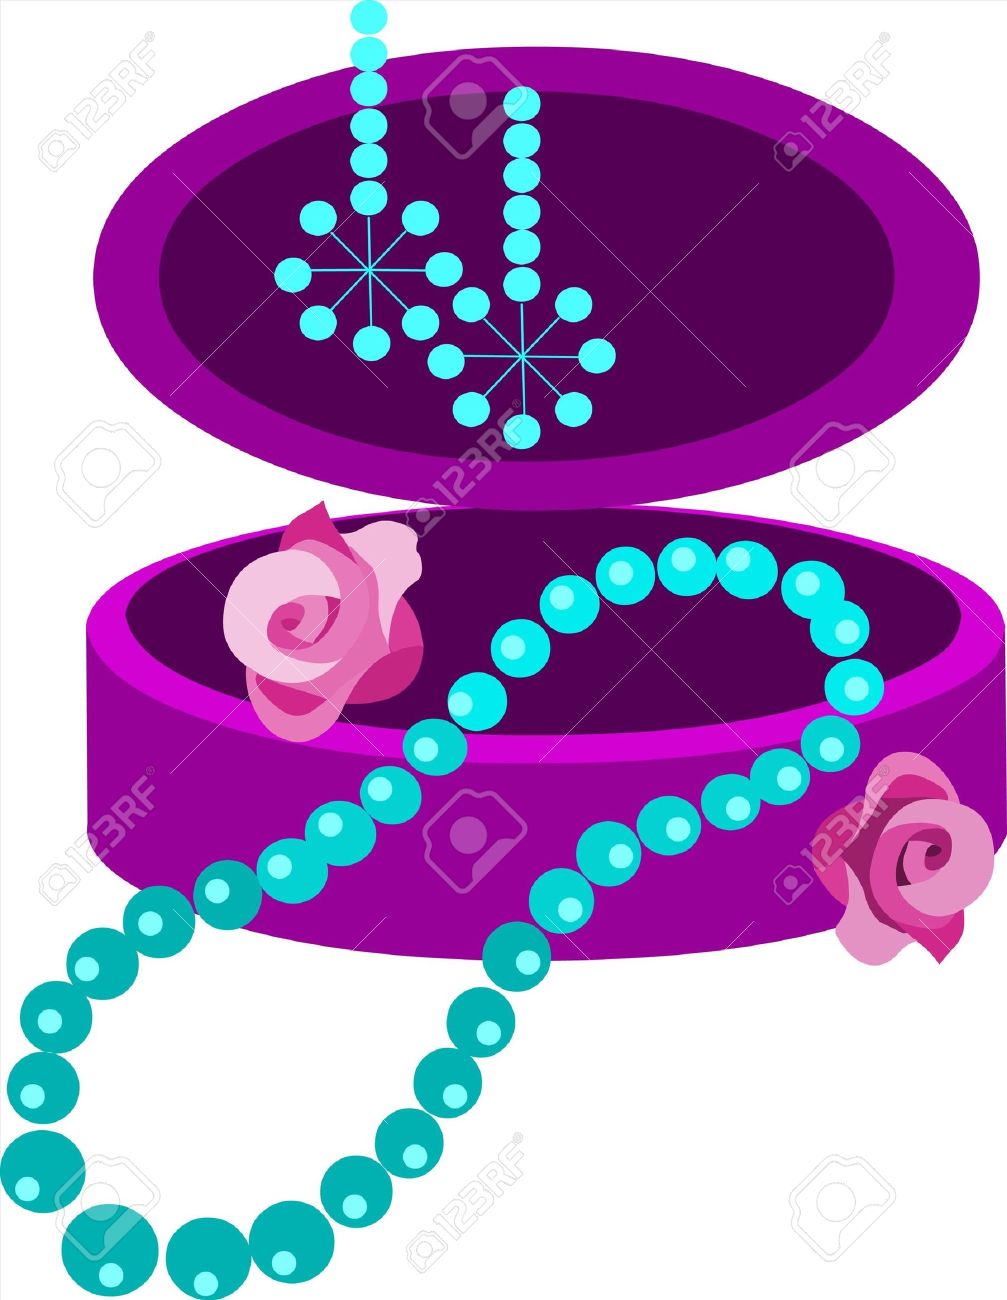 Jewelry Clipart Images Free | Free download on ClipArtMag